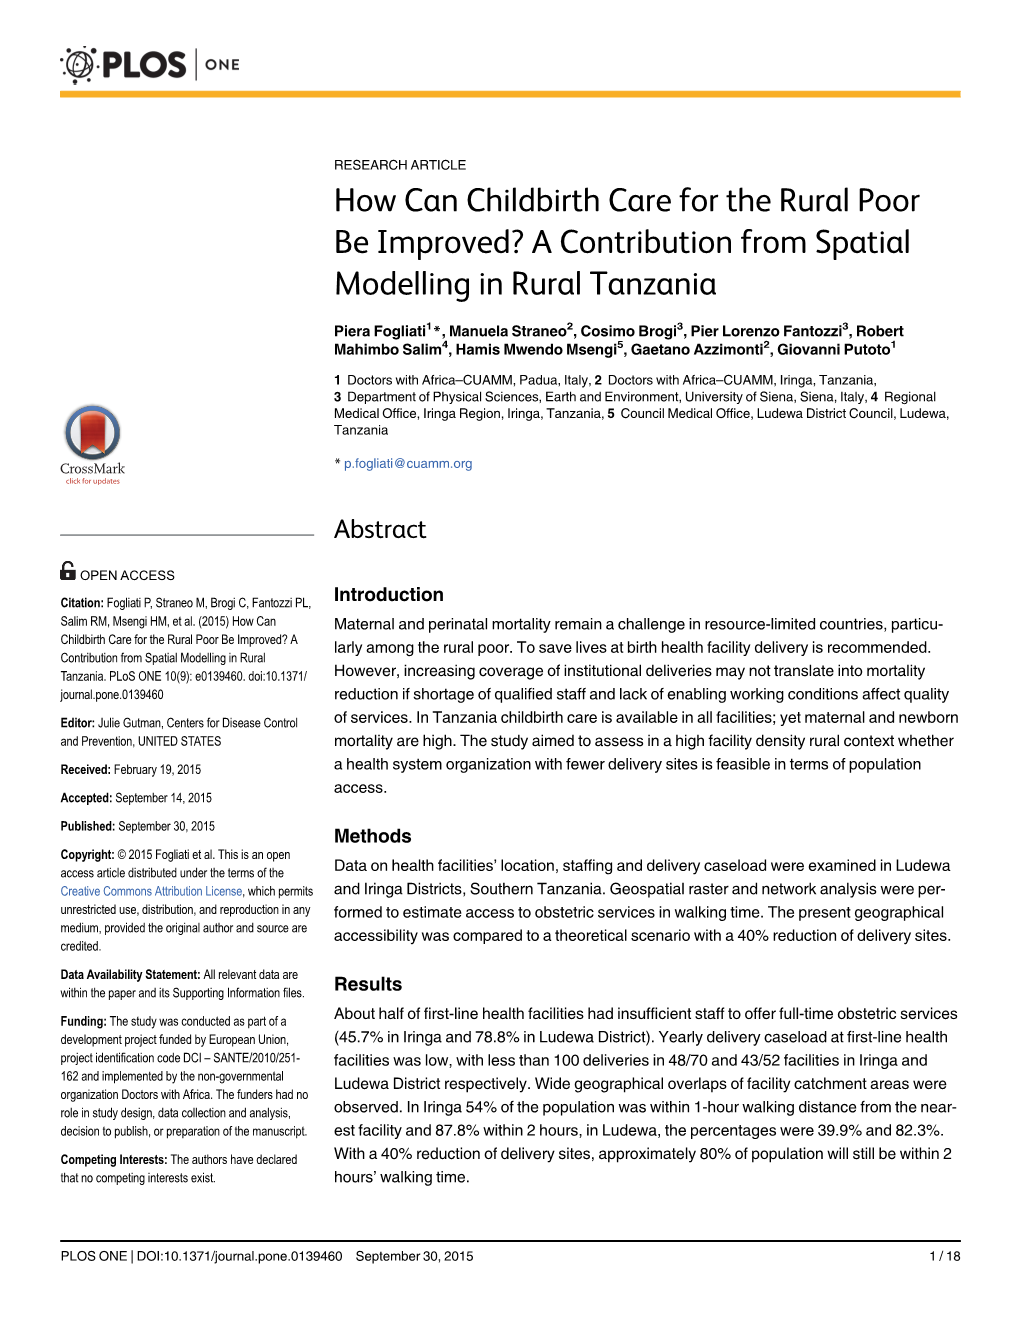 How Can Childbirth Care for the Rural Poor Be Improved? a Contribution from Spatial Modelling in Rural Tanzania